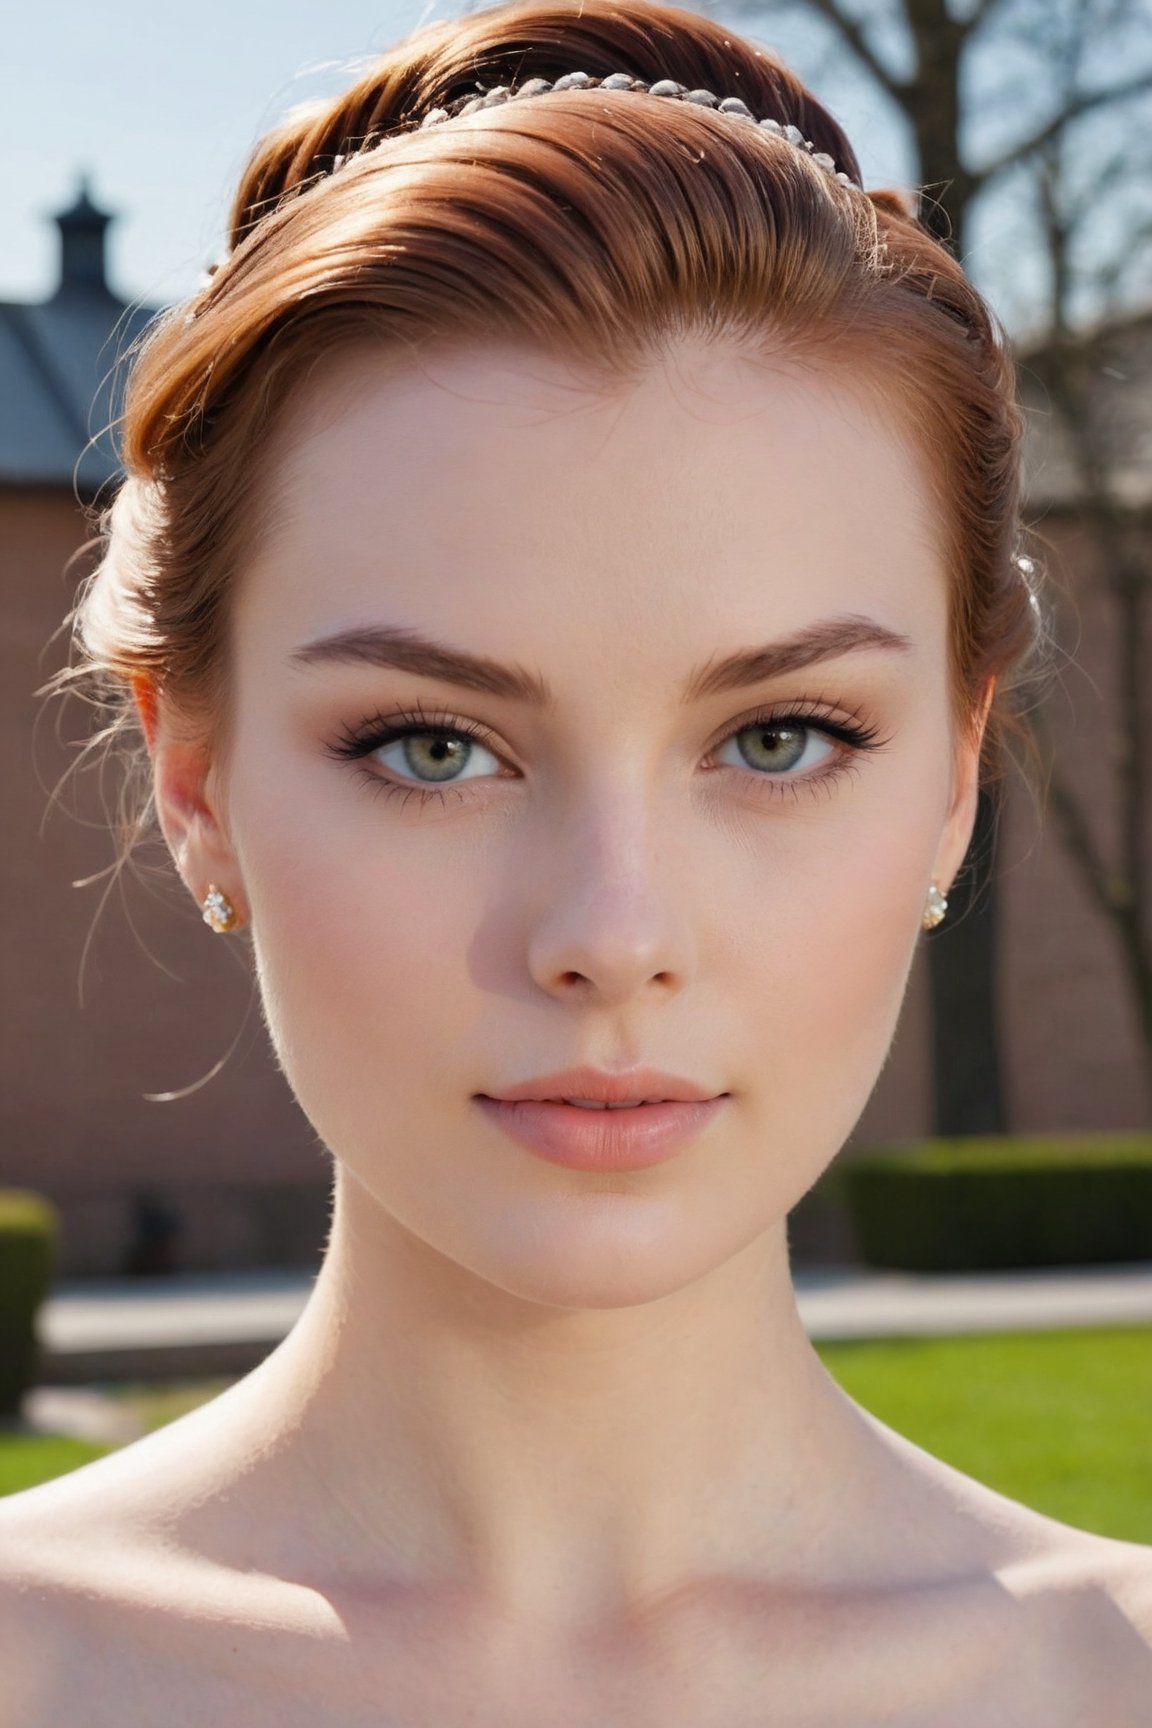 headshot,Nudity,Naked,Nude,No Clothes,Auburn hair,face similar to Grace Kelly,Russian,pale skin,Top Knot Hairstyle,Metallic makeup,21 year old,Boyish_normal_breasts,headshot,Sunny Day Spring,Posing for a photo


